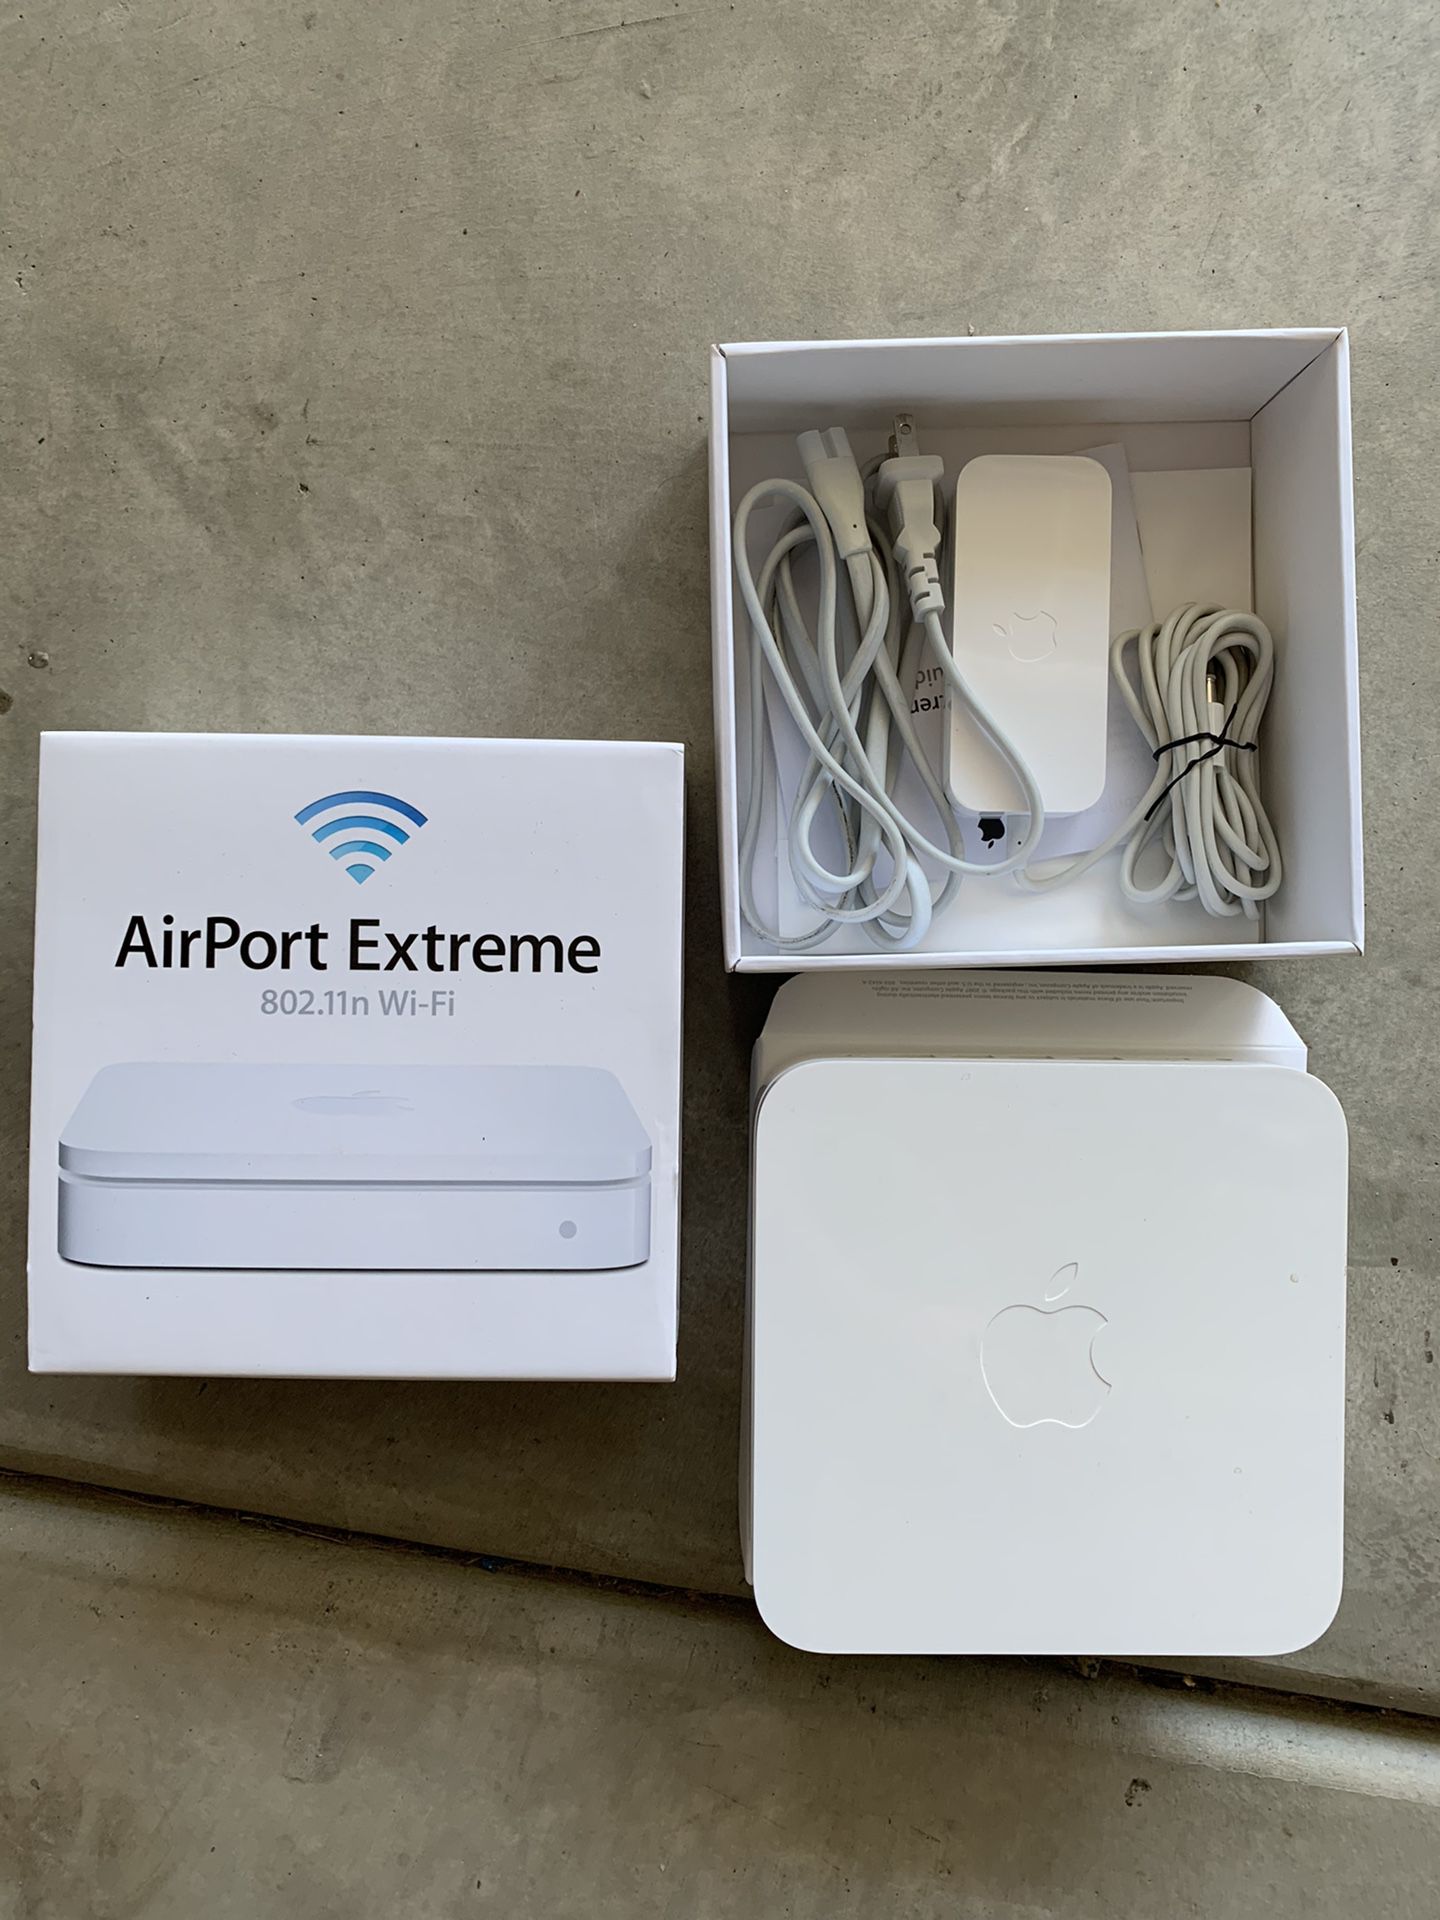 AirPort Extreme WiFi router